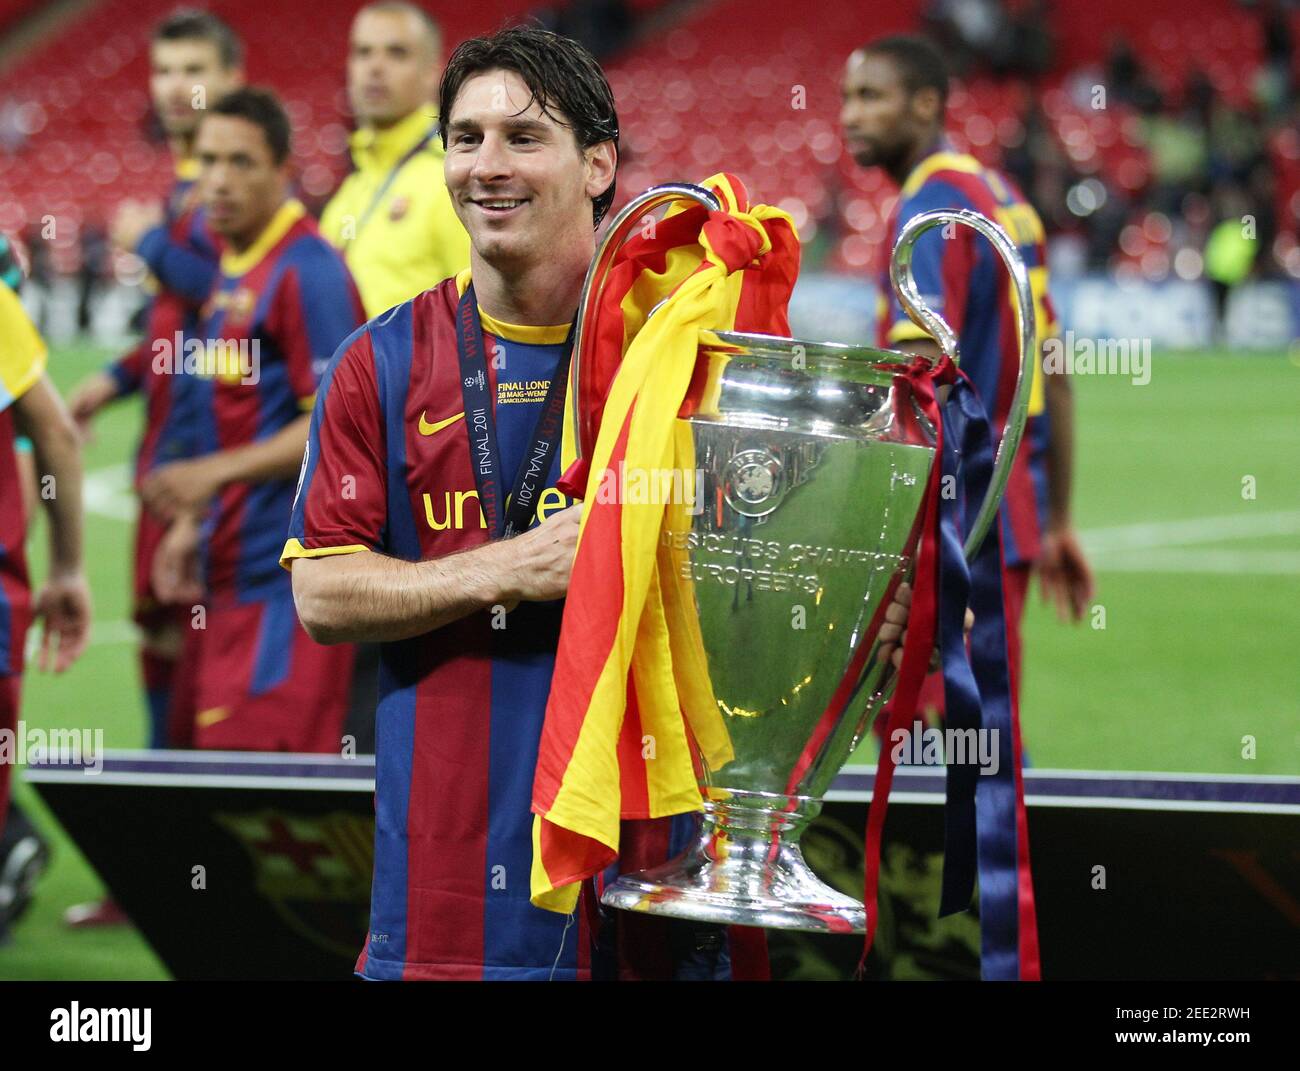 Football - Manchester United v FC Barcelona 2011 UEFA Champions League Final  - Wembley Stadium, London, England - 10/11 - 28/5/11 Barcelona's Lionel  Messi celebrates with trophy after winning the Champions League